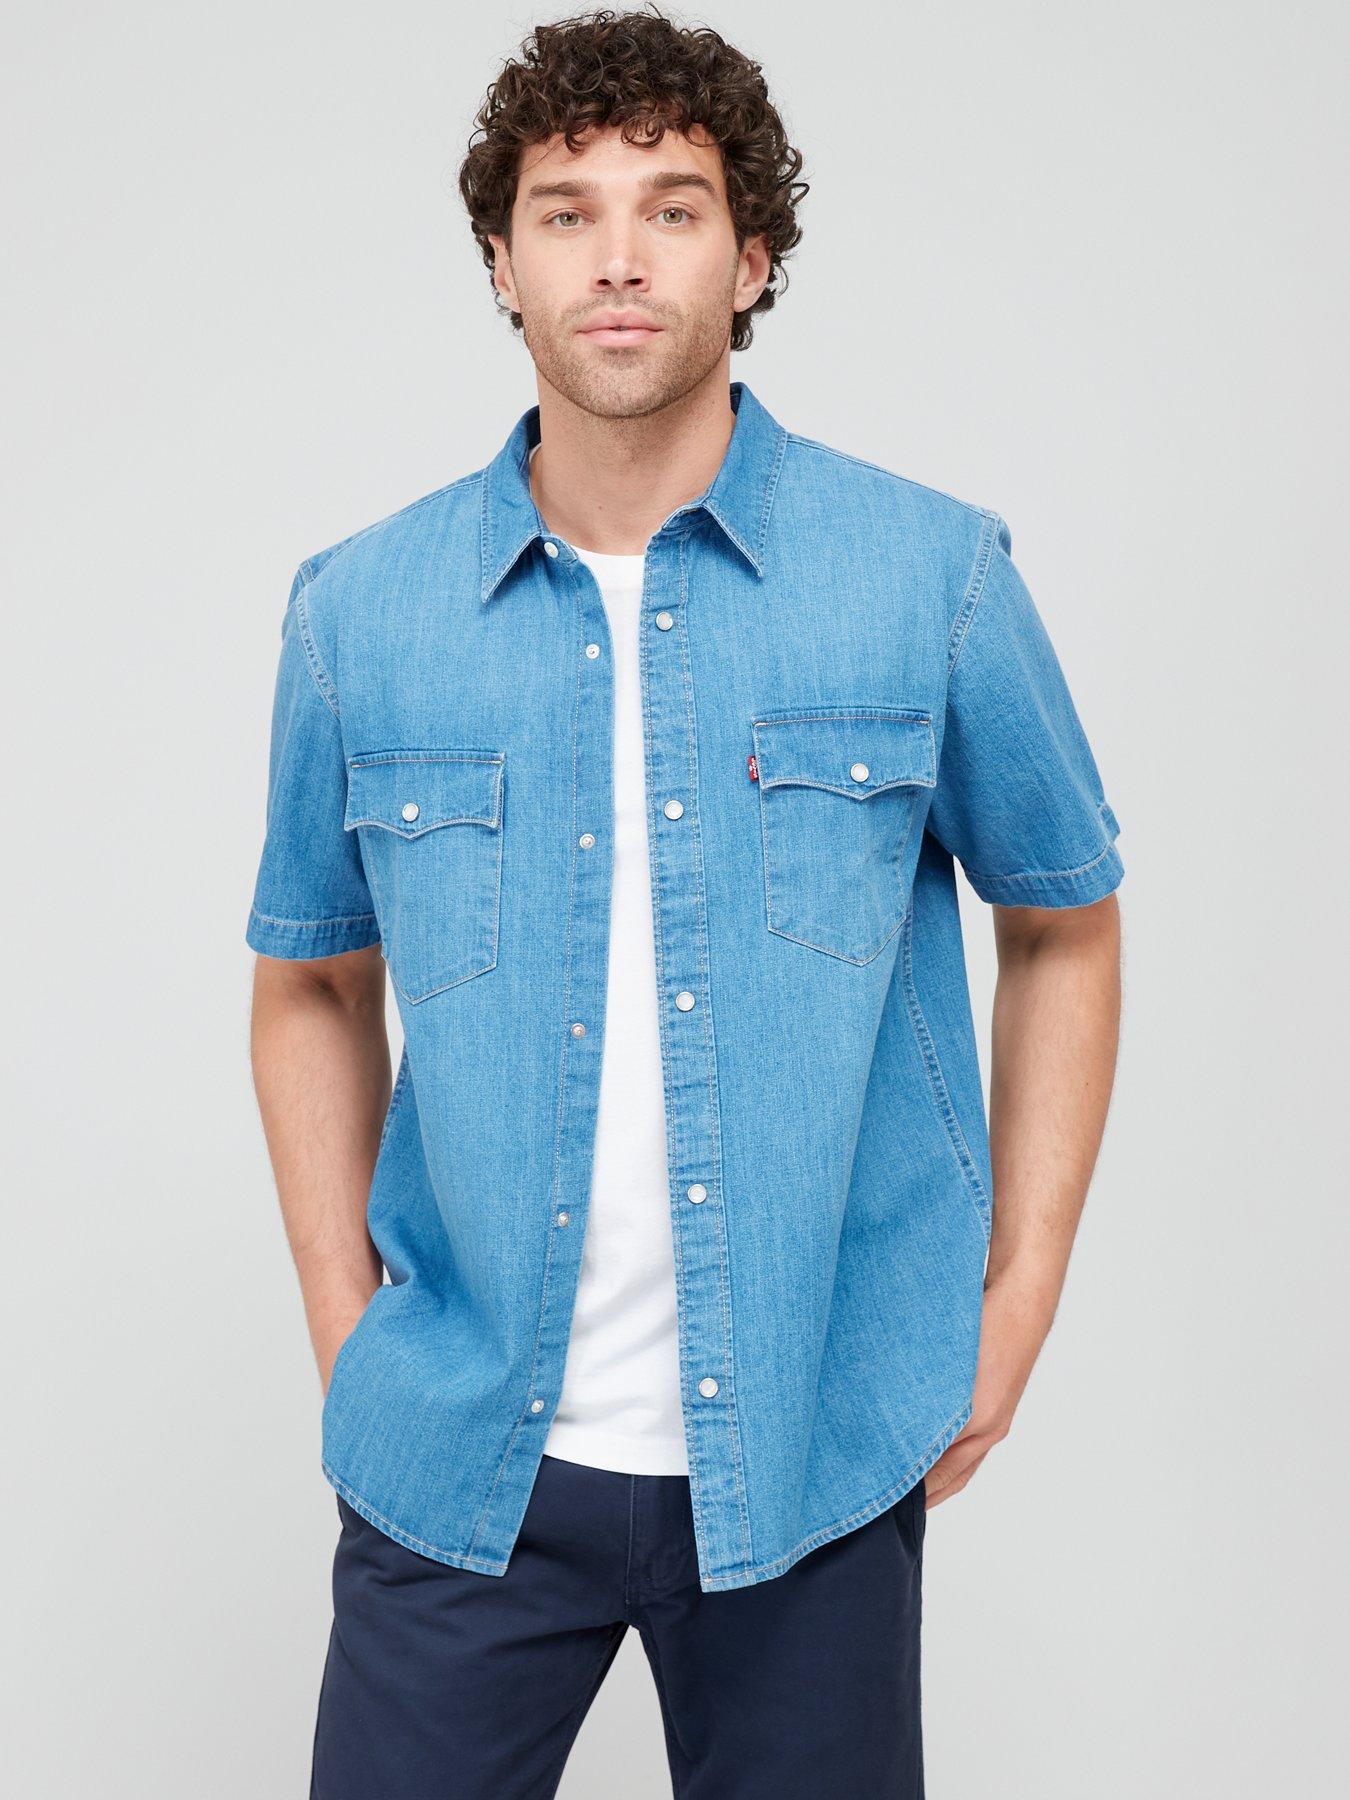 Levi's Short Sleeve Relaxed Fit Western Shirt - Blue | Very.co.uk